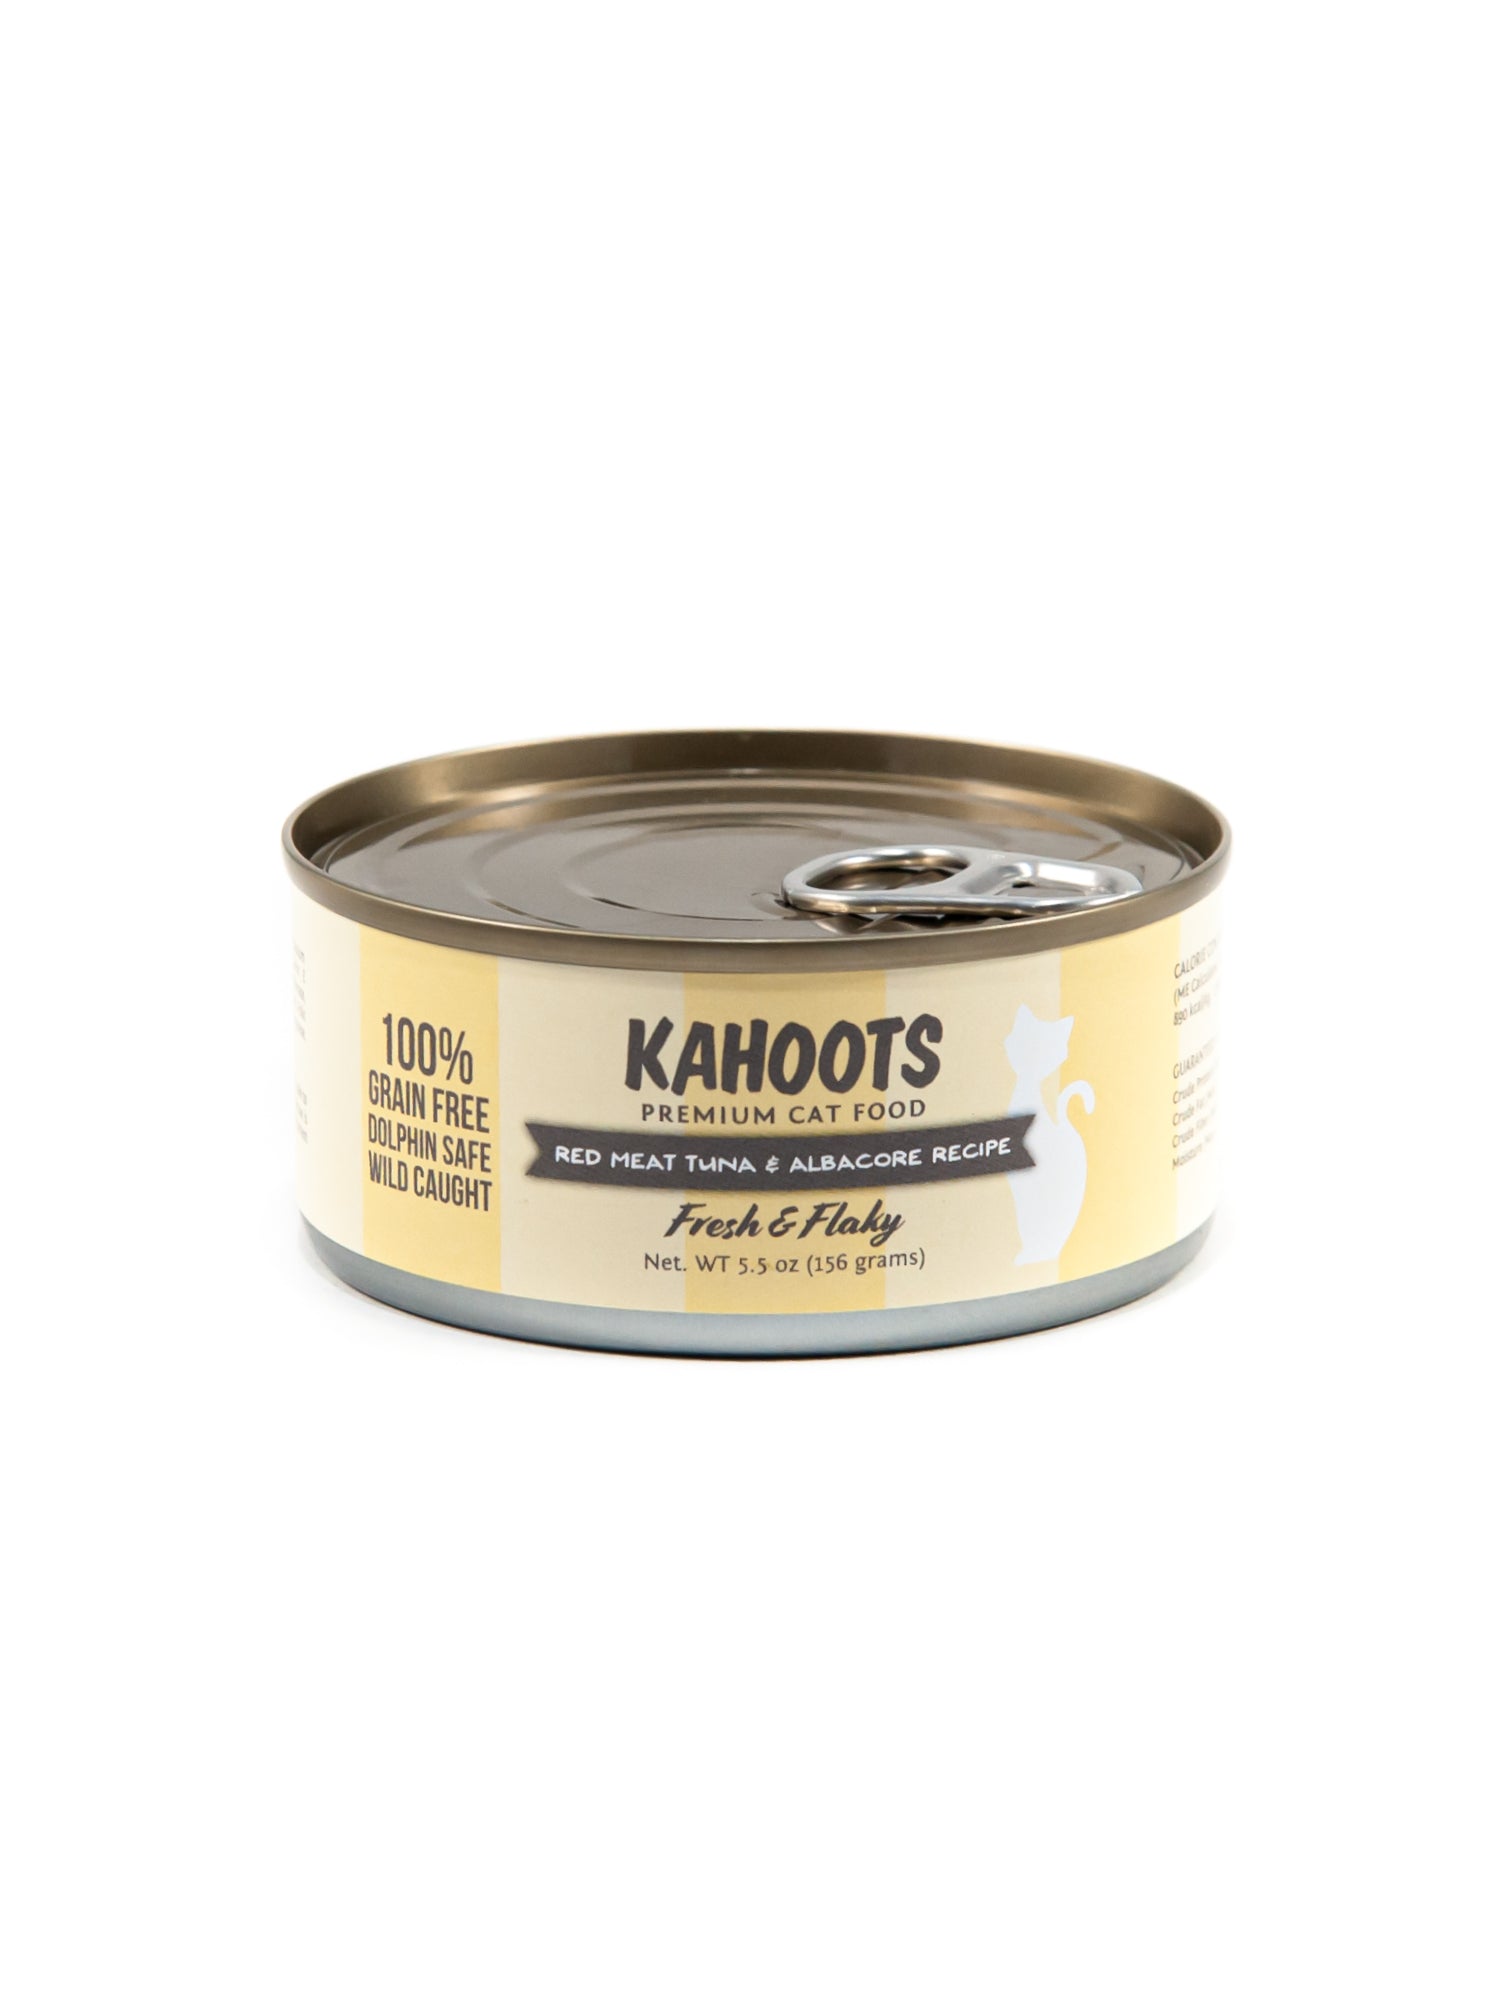 Red meat tuna and albacore wet cat food can. White cat over a yellow stripe background